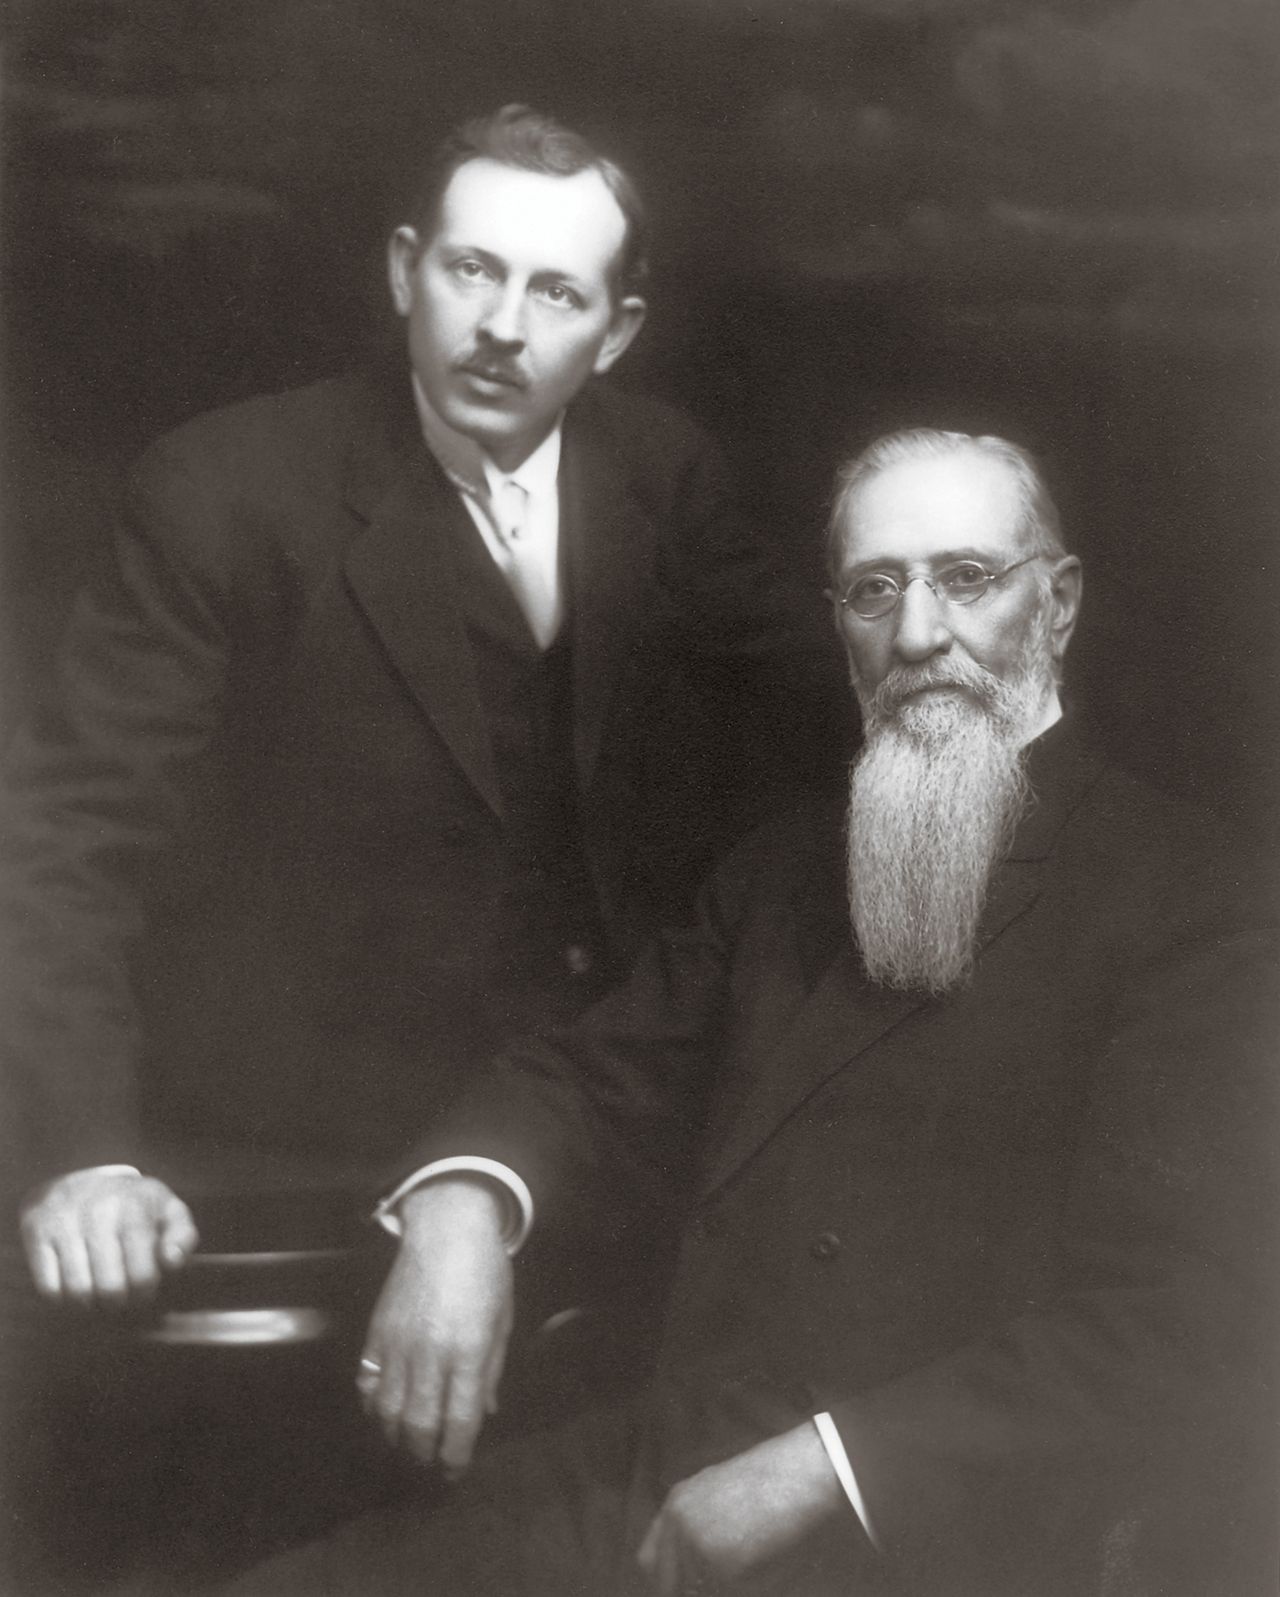 Joseph Fielding Smith standing beside his father, Joseph F. Smith, in May 1914. Teachings of Presidents of the Church: Joseph Fielding Smith (2013), 140